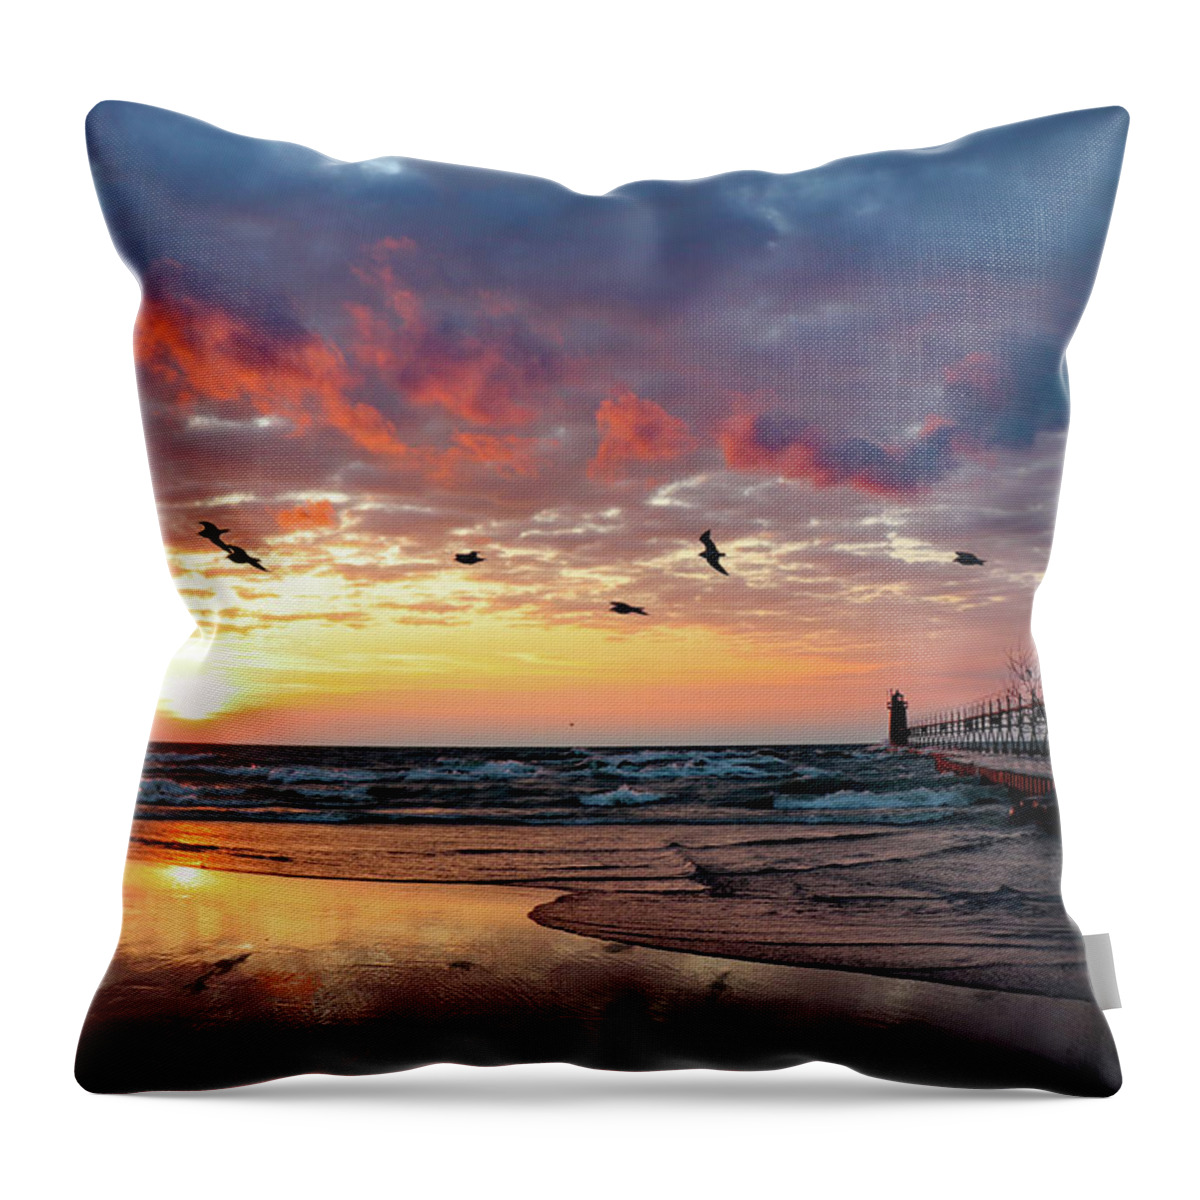 Sunset Throw Pillow featuring the photograph South Haven Beach Sunset by David T Wilkinson